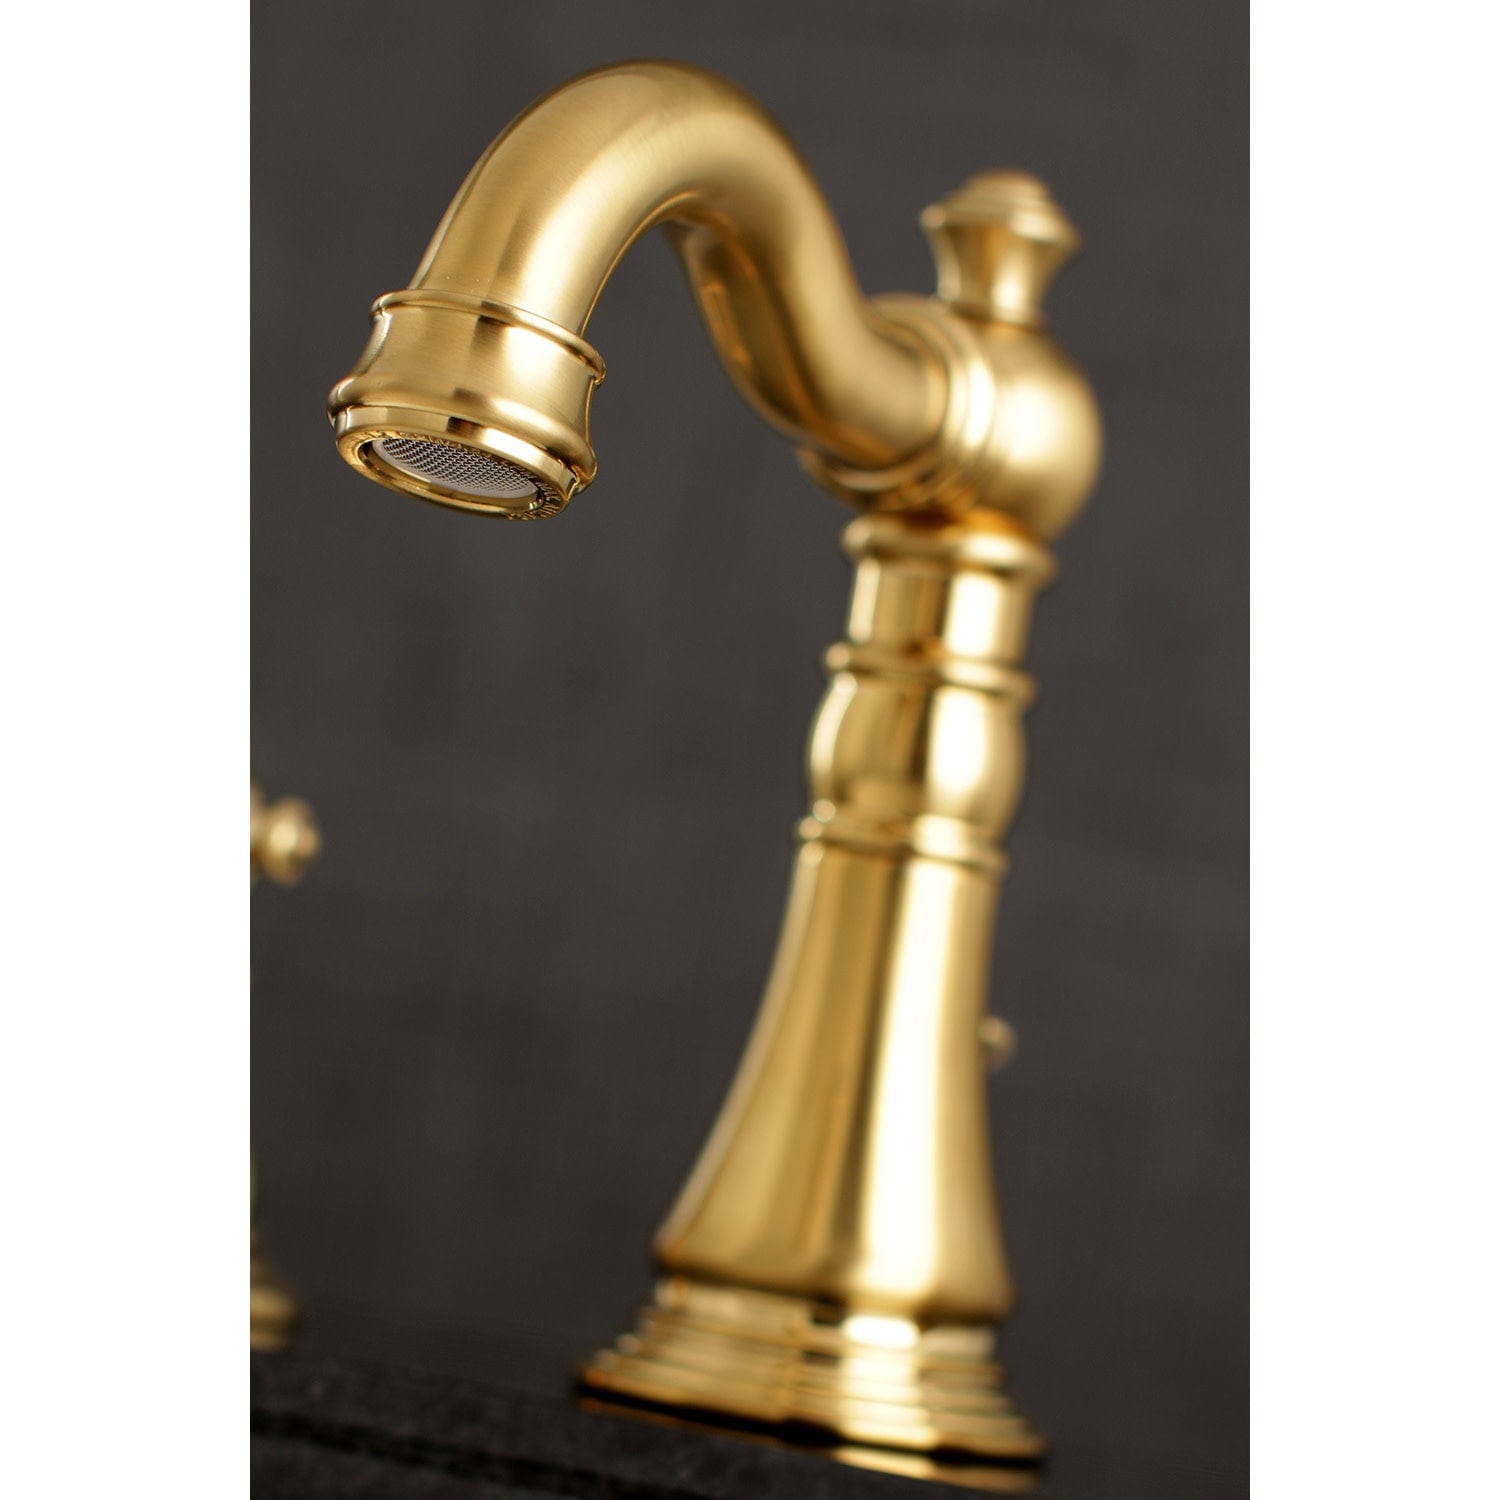 KINGSTON Brass Fauceture English Classic Widespread Bathroom Faucet - Brushed Brass